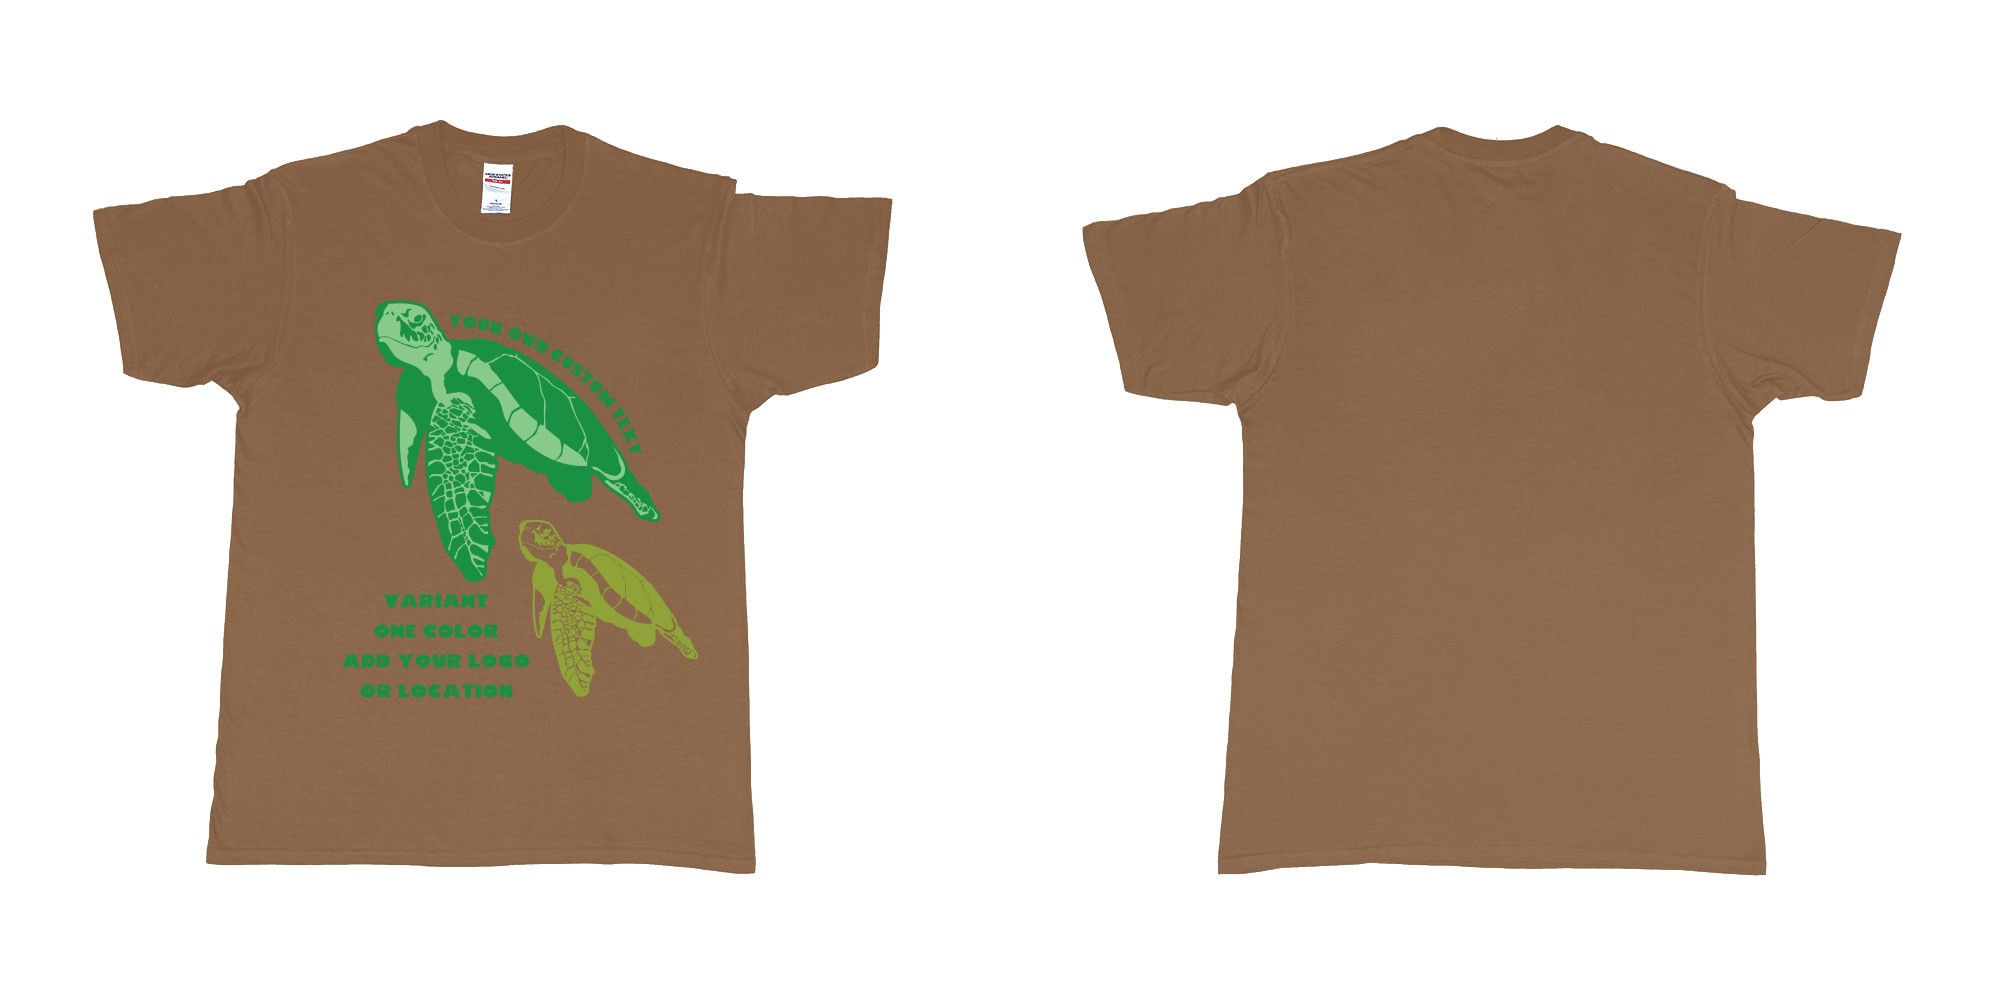 Custom tshirt design hawksbill green sea turtle chilling add logo in fabric color chestnut choice your own text made in Bali by The Pirate Way